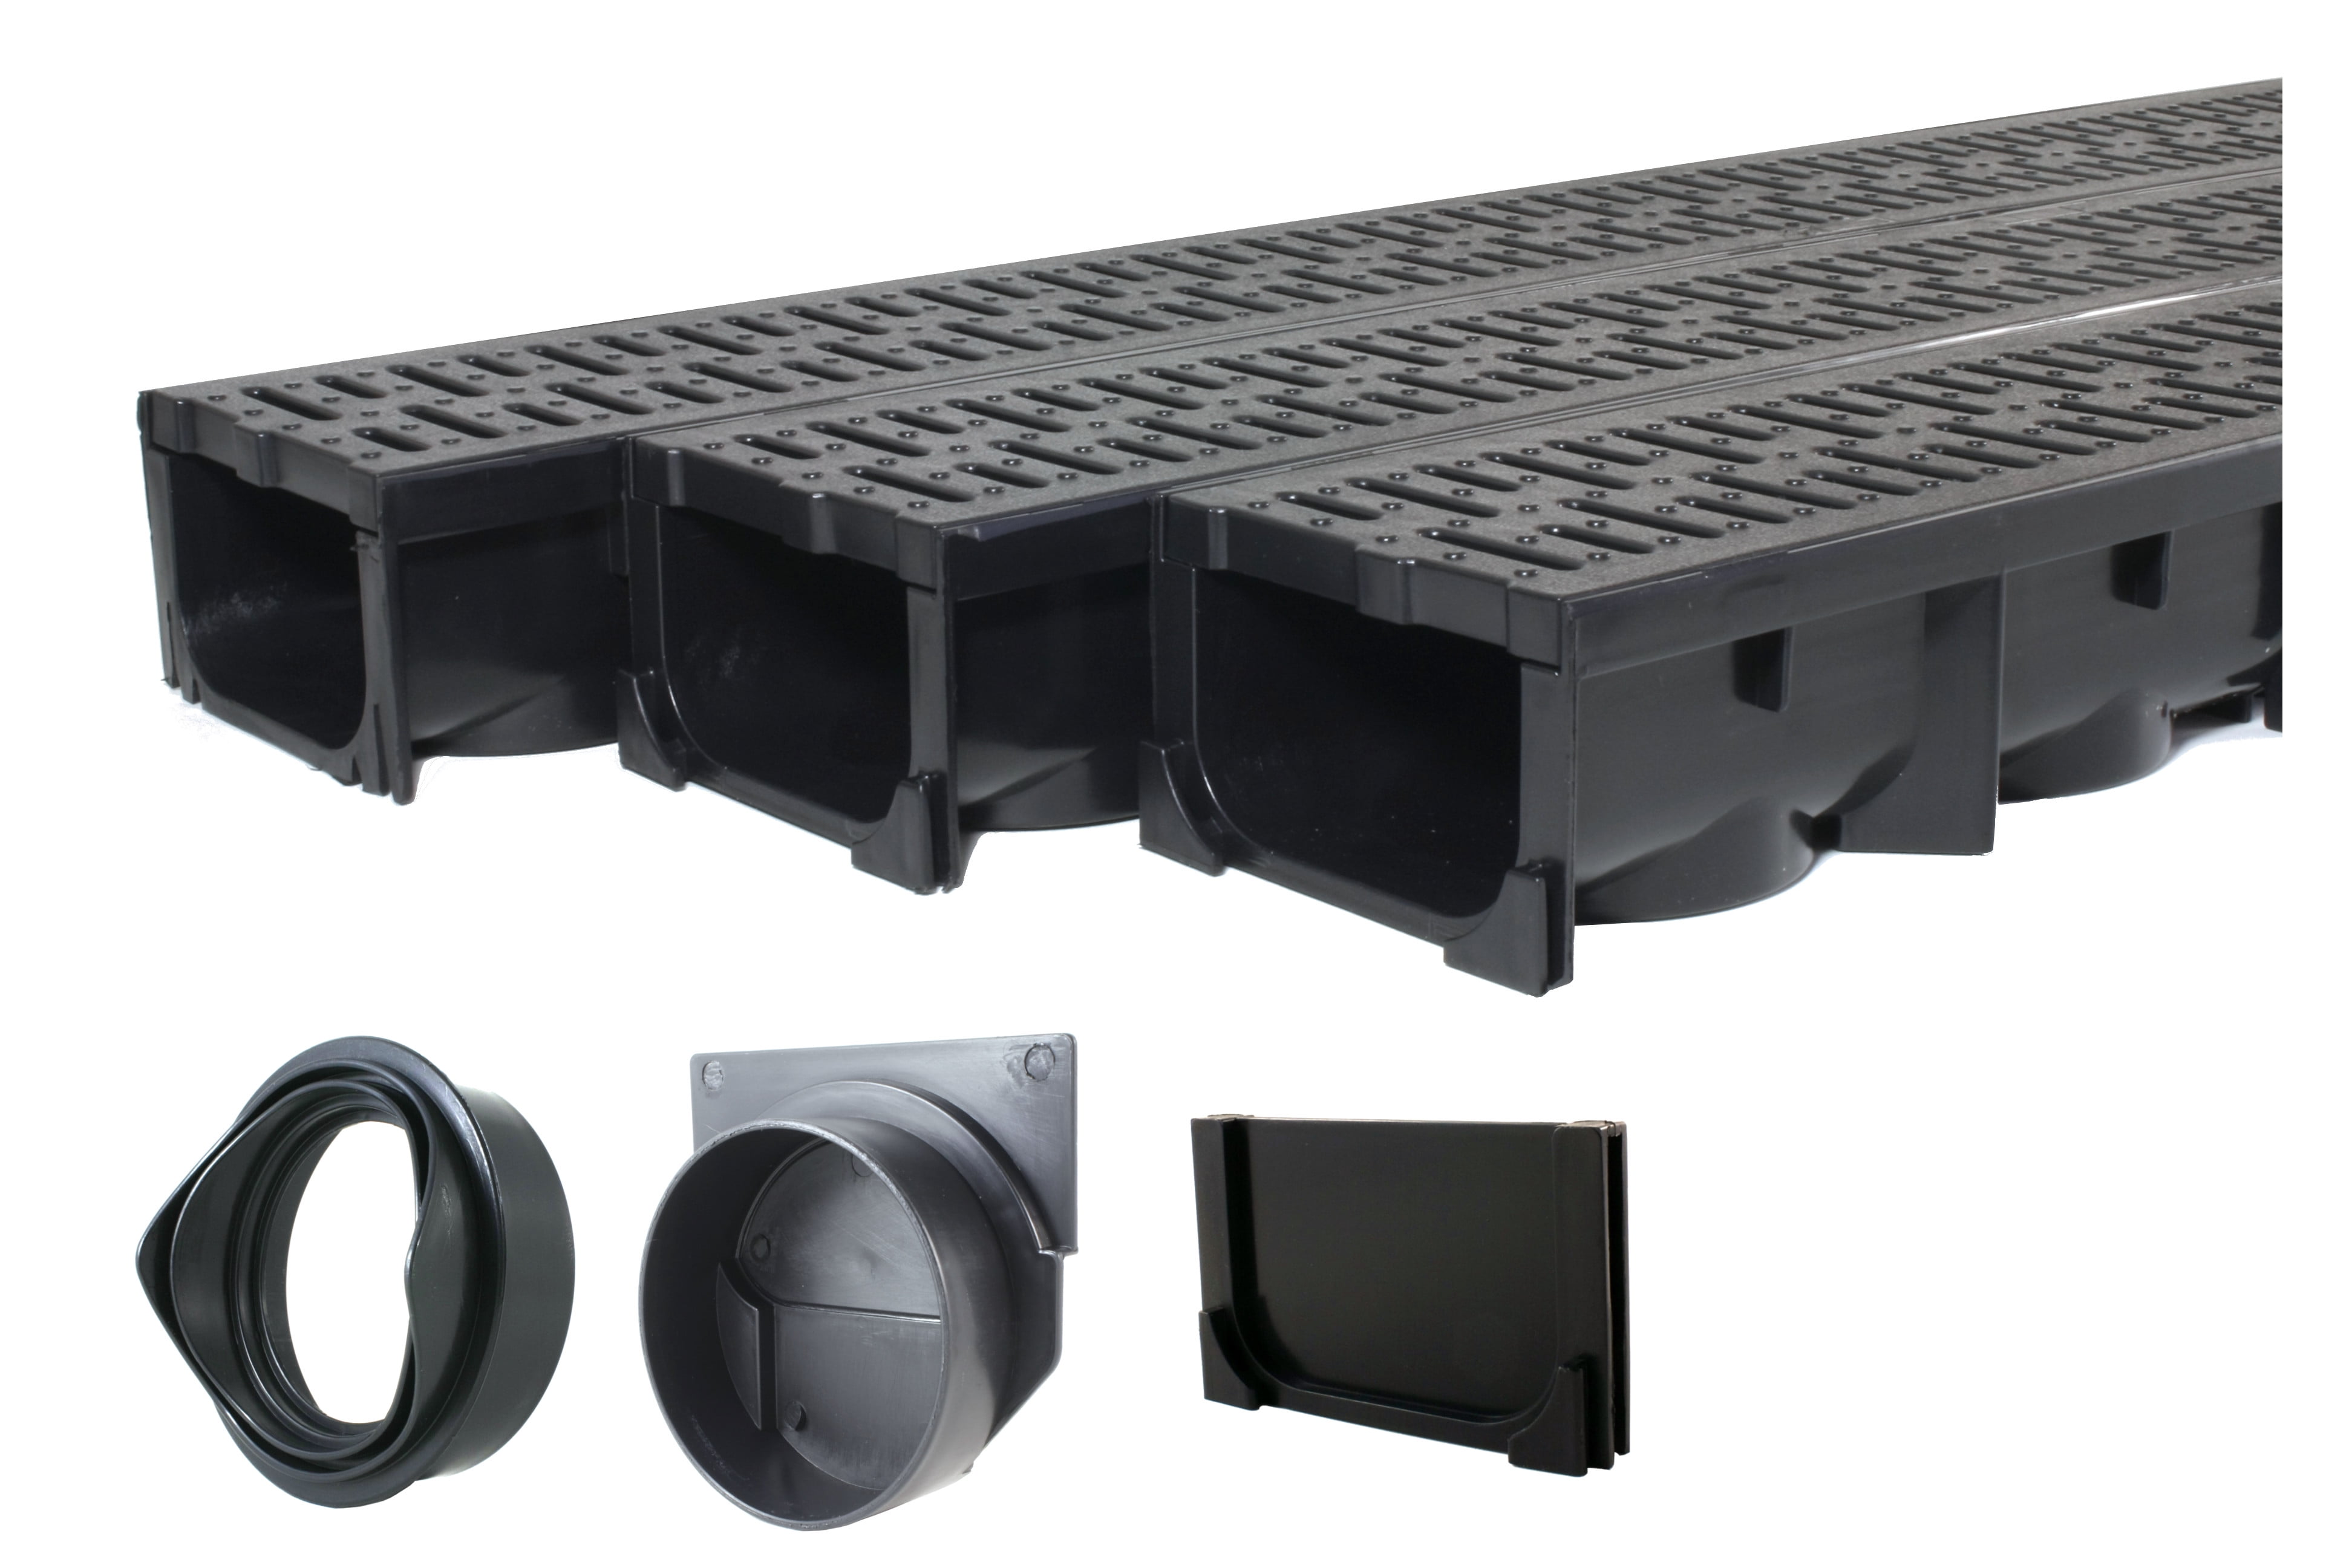 Drainage Trench Channel Drain With Grate Black Plastic 3 X